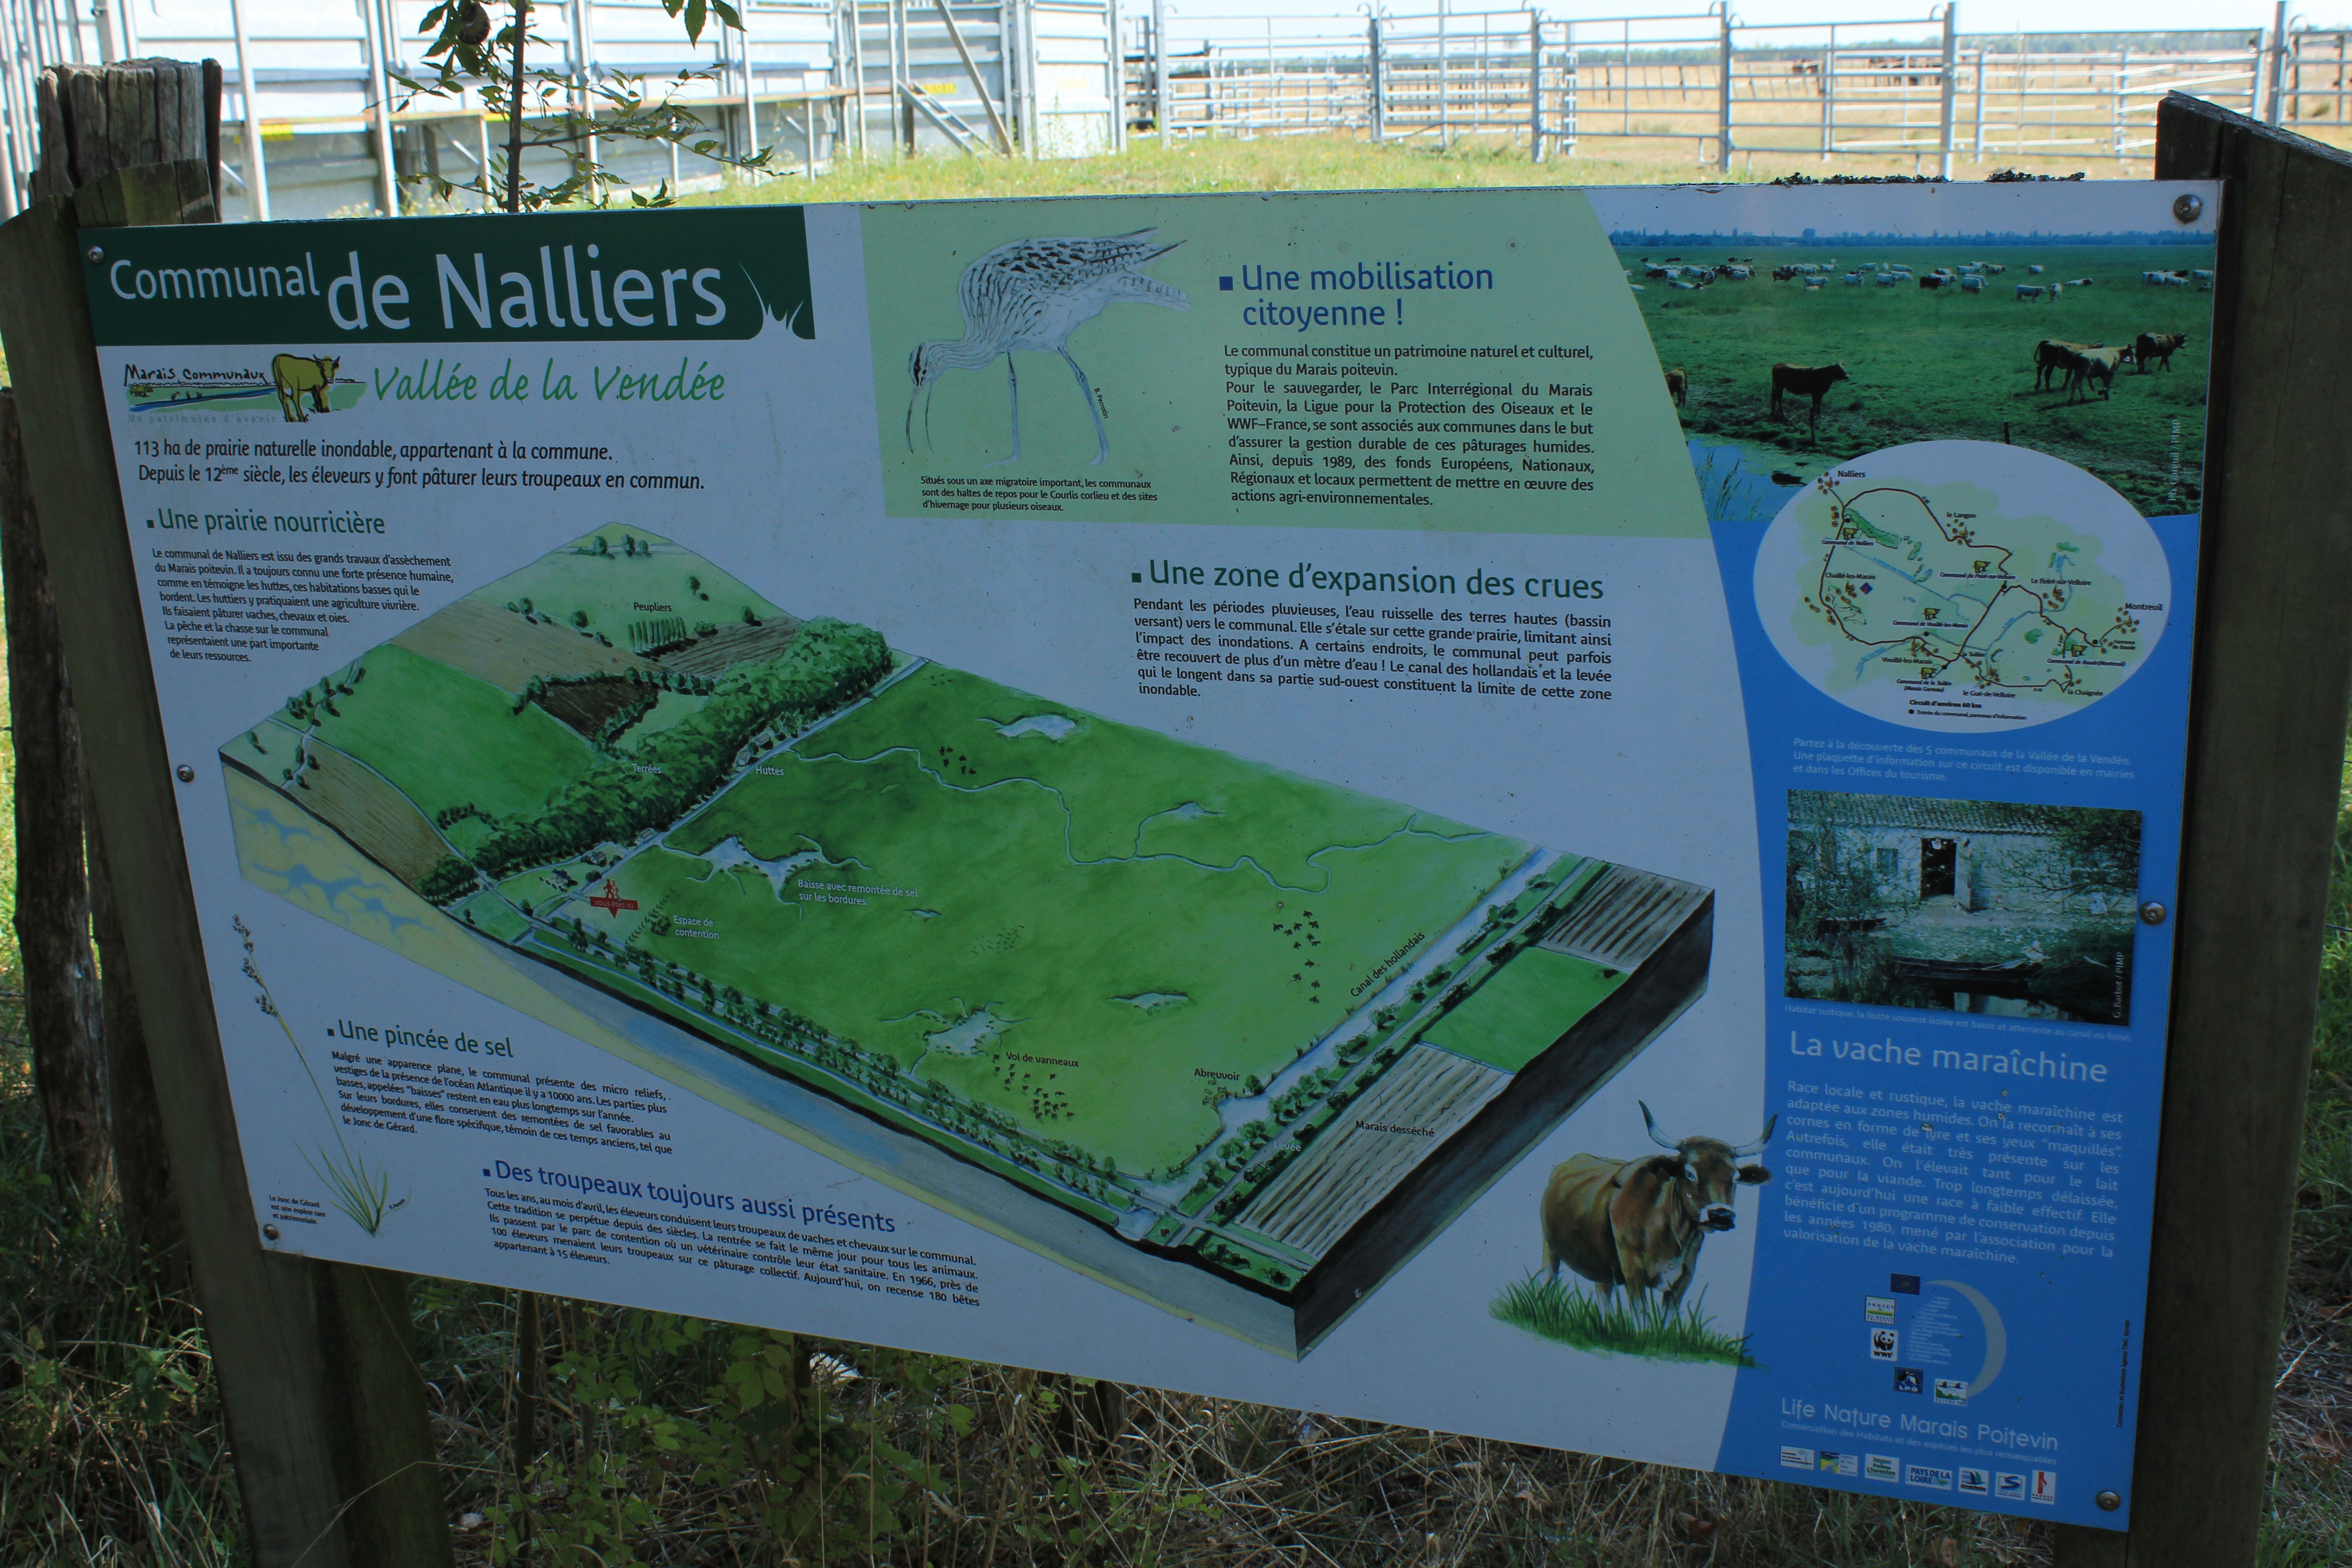 Information board about the project in Nalliers.